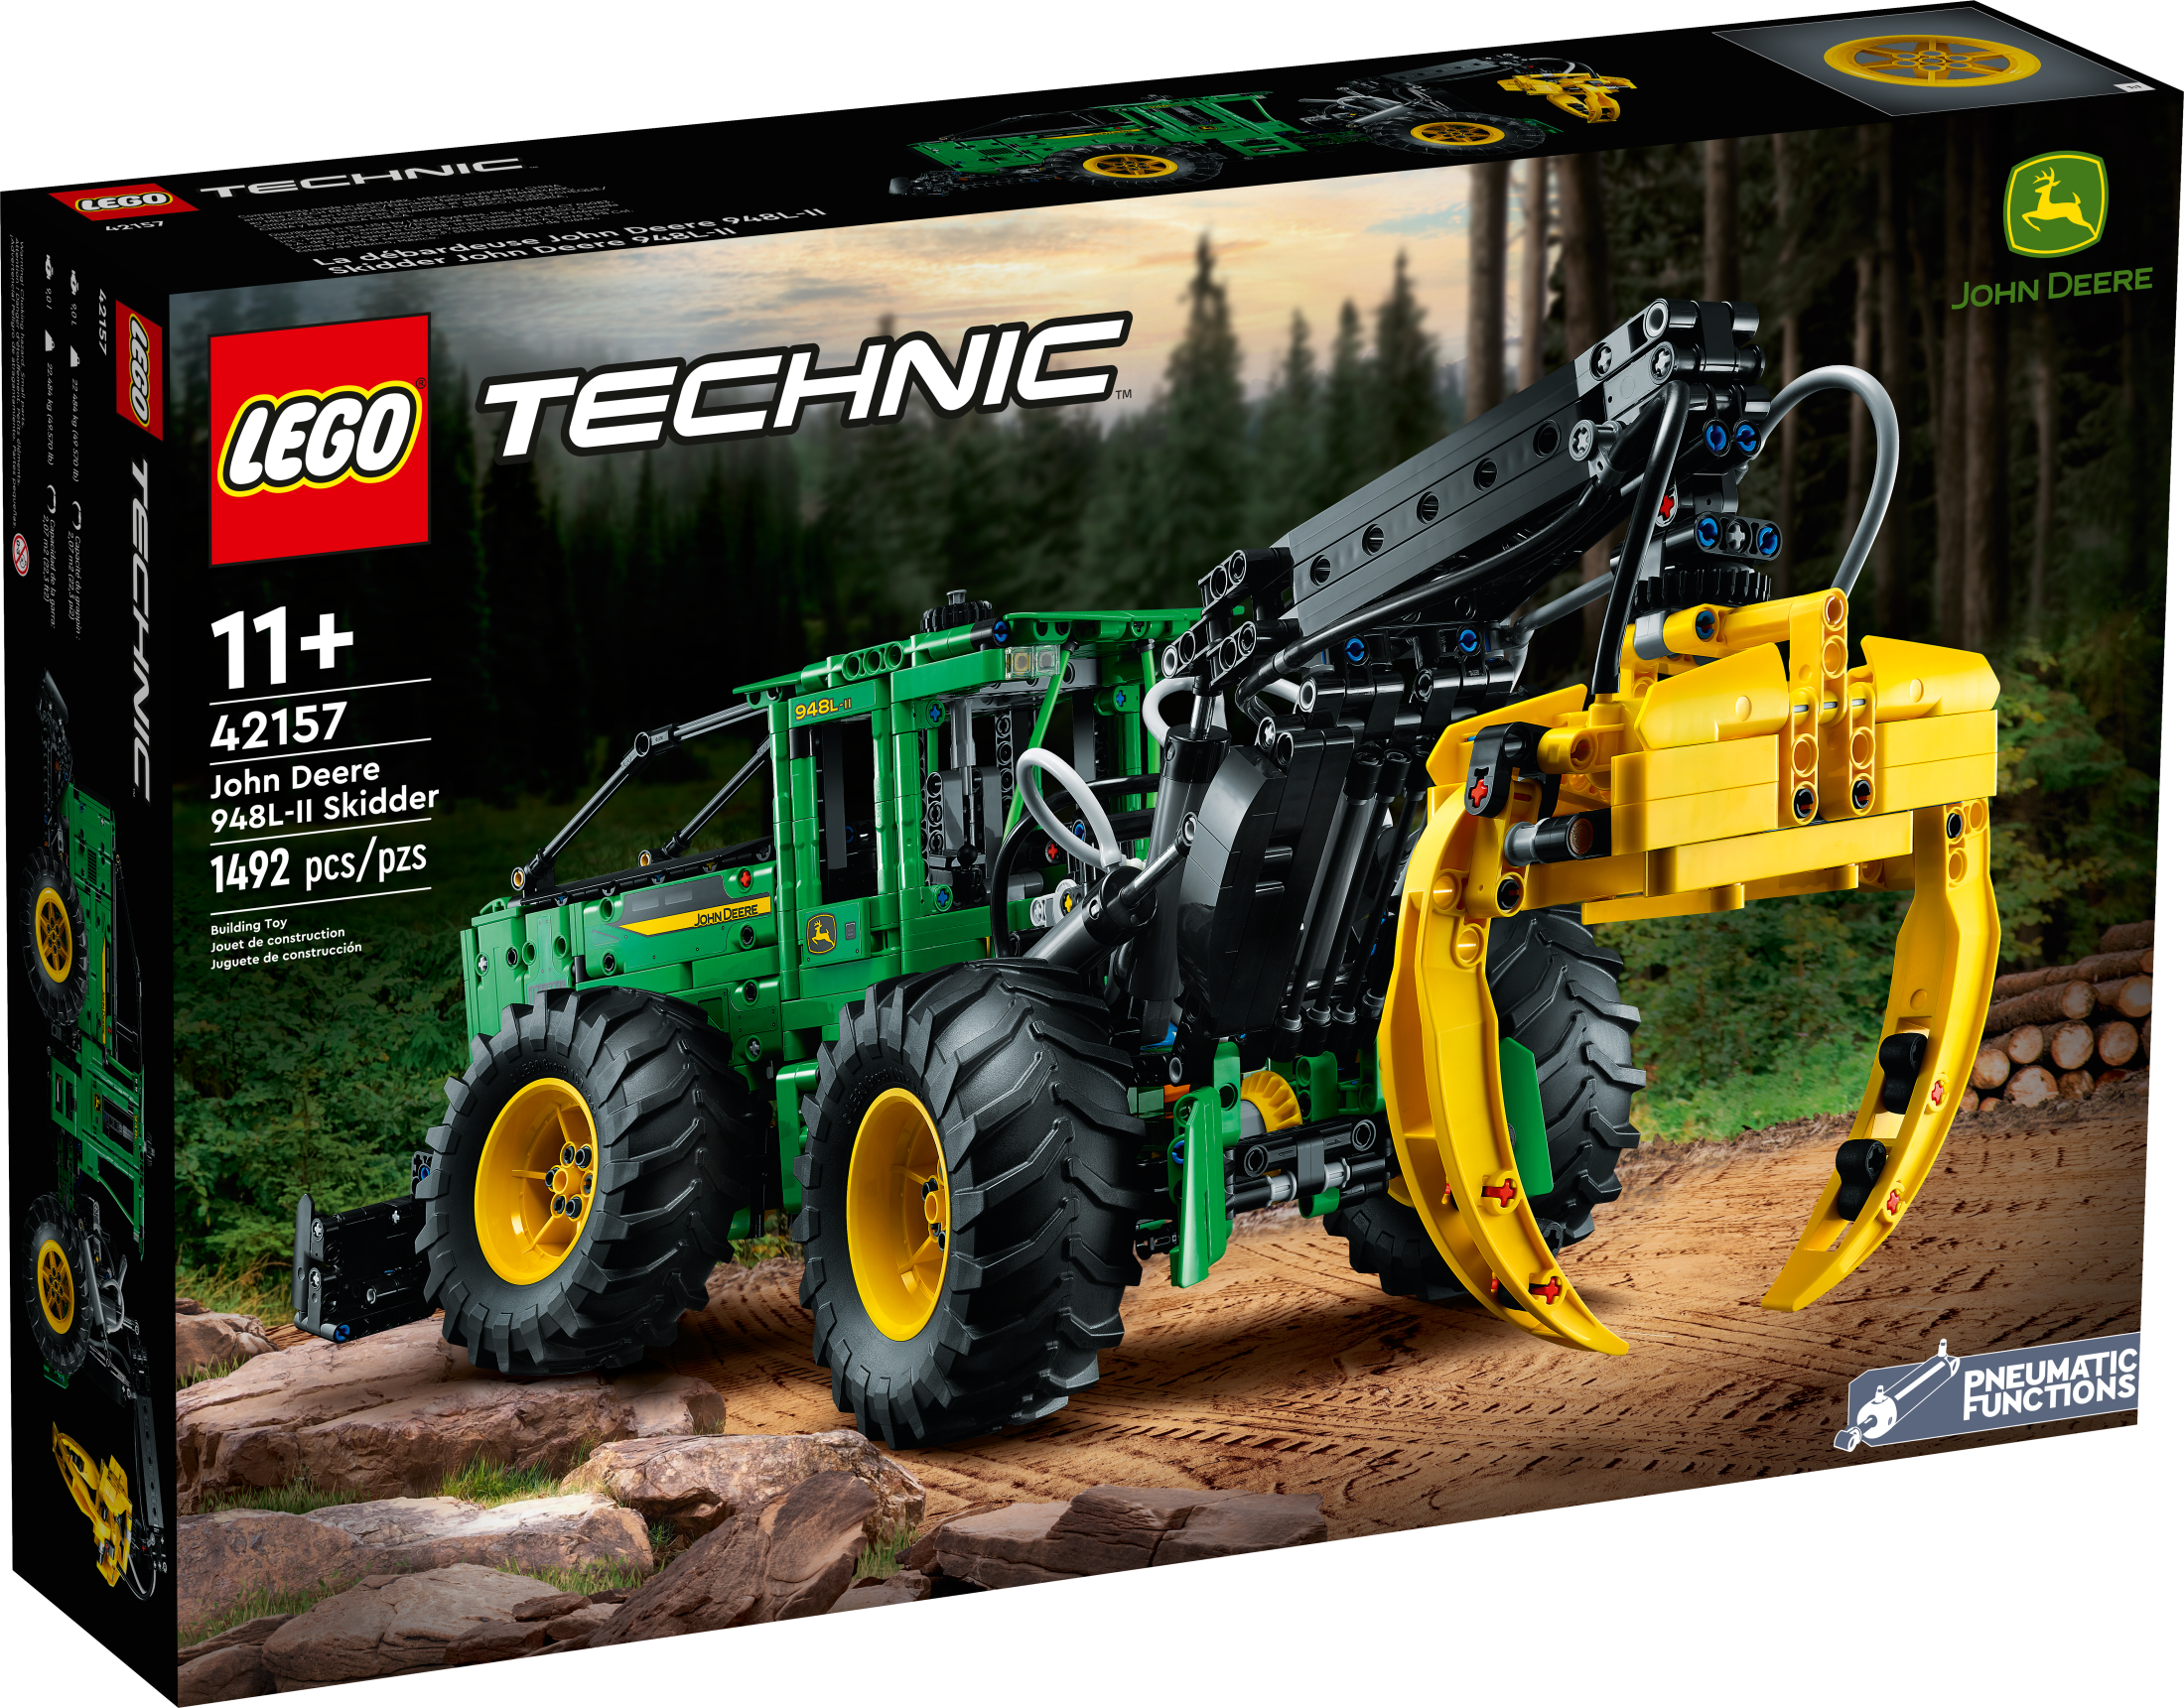 LEGO Technic John Deere 948L-II Skidder 42157 Advanced Tractor Toy Building Kit for Kids Ages 11 and Up, Gift for Kids Who Love Engineering and Heavy-Duty Farm Vehicles - image 3 of 9